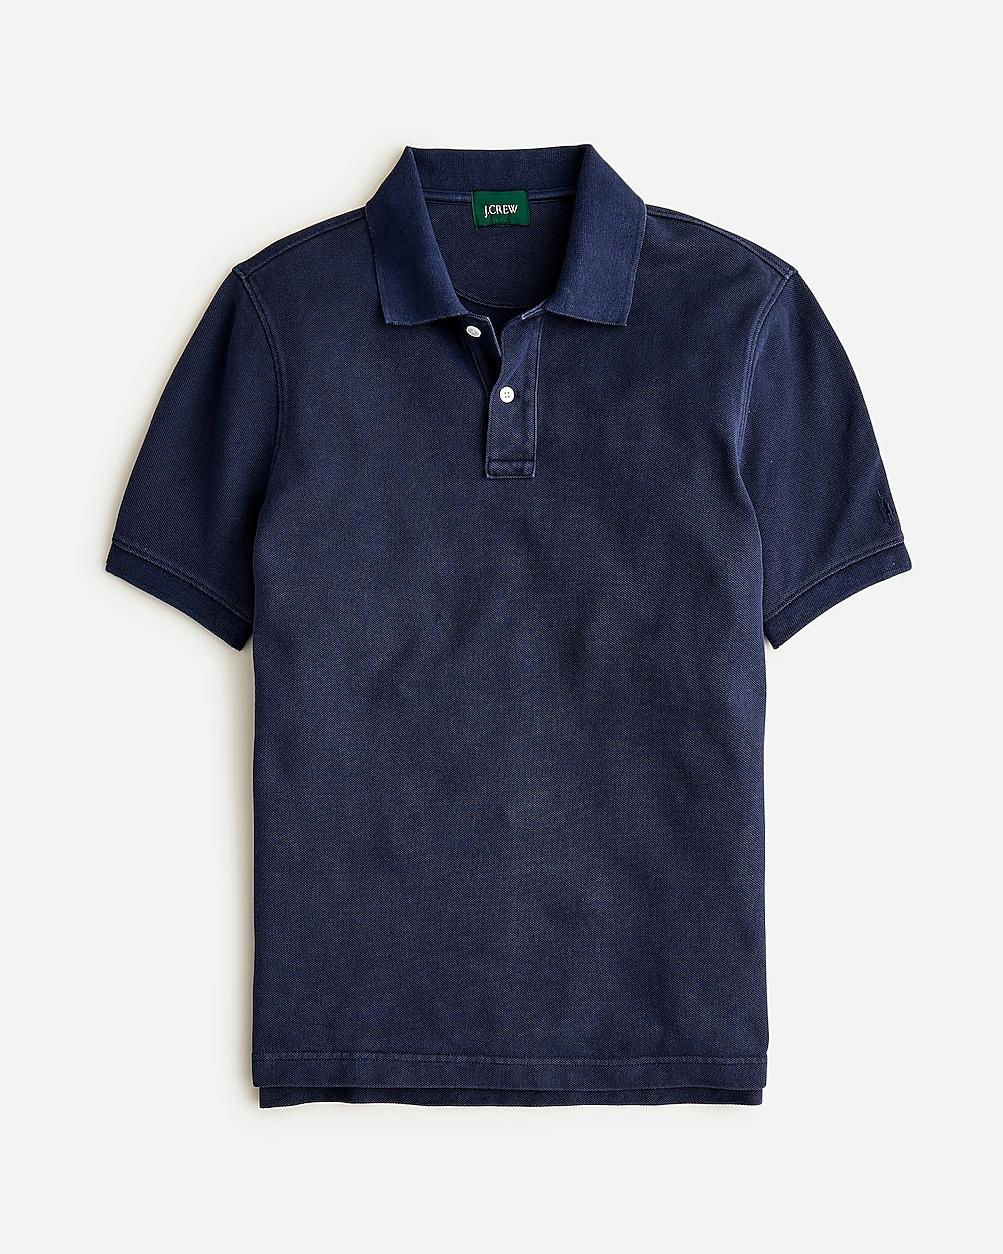 Slim washed piqué polo shirt by J.CREW